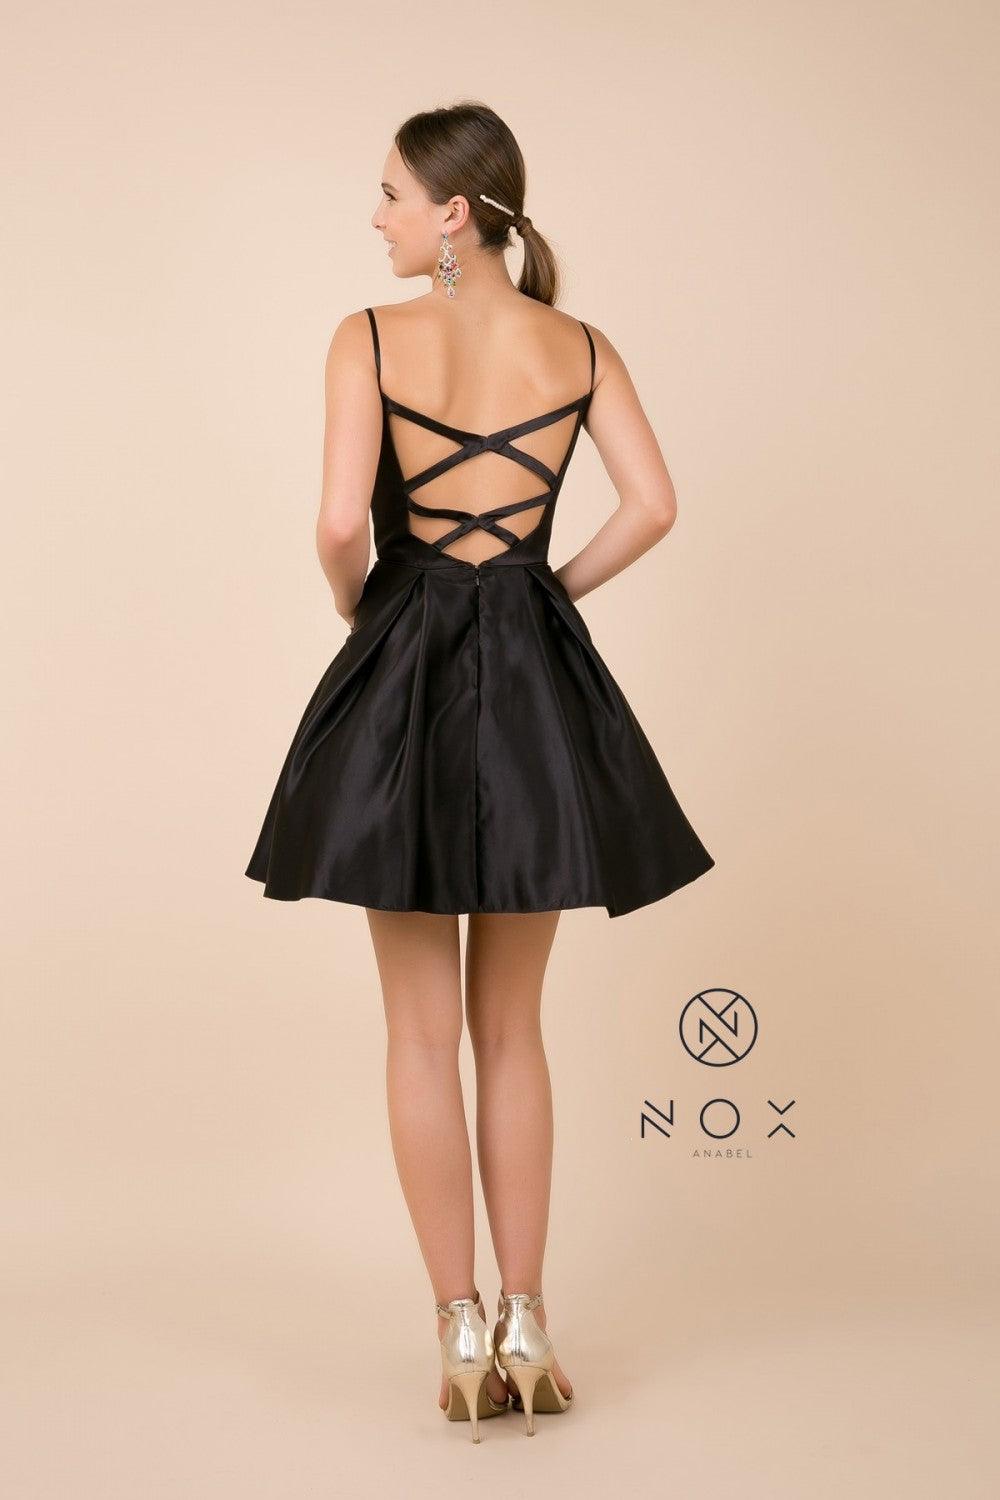 Sexy Short Homecoming Dress Cocktail - The Dress Outlet Nox Anabel